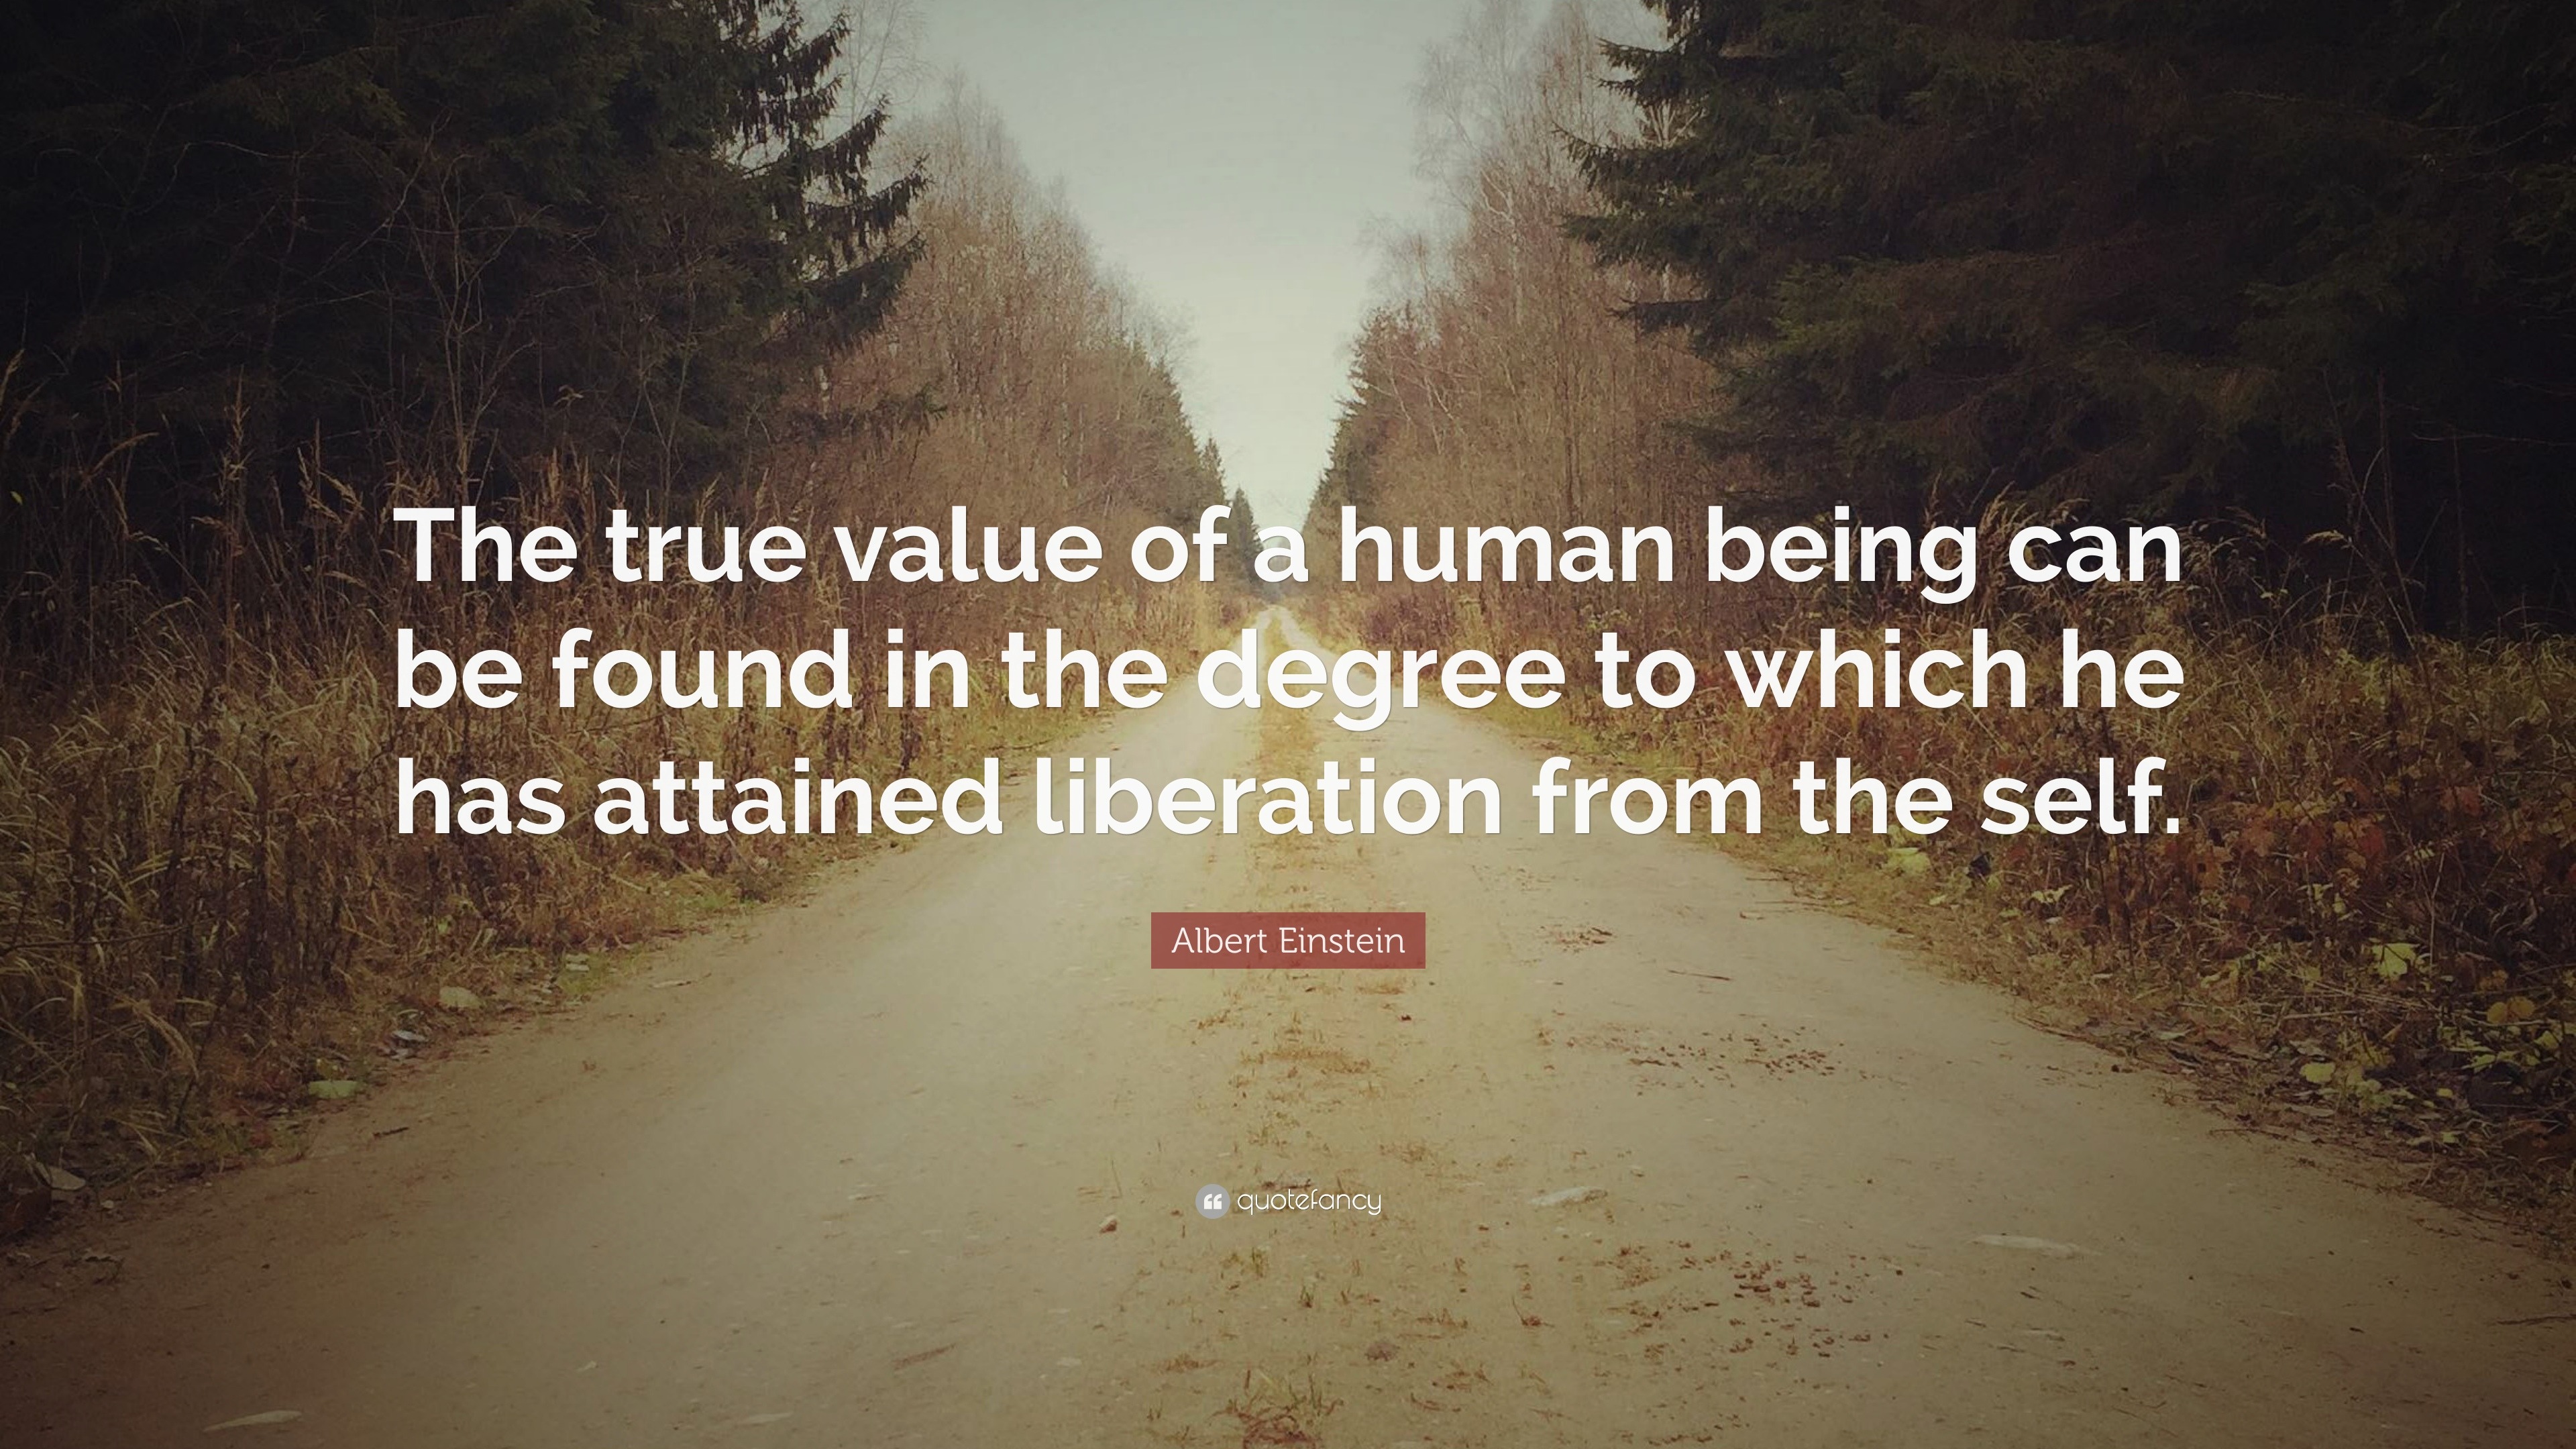 Albert Einstein Quote: “The true value of a human being can be found in